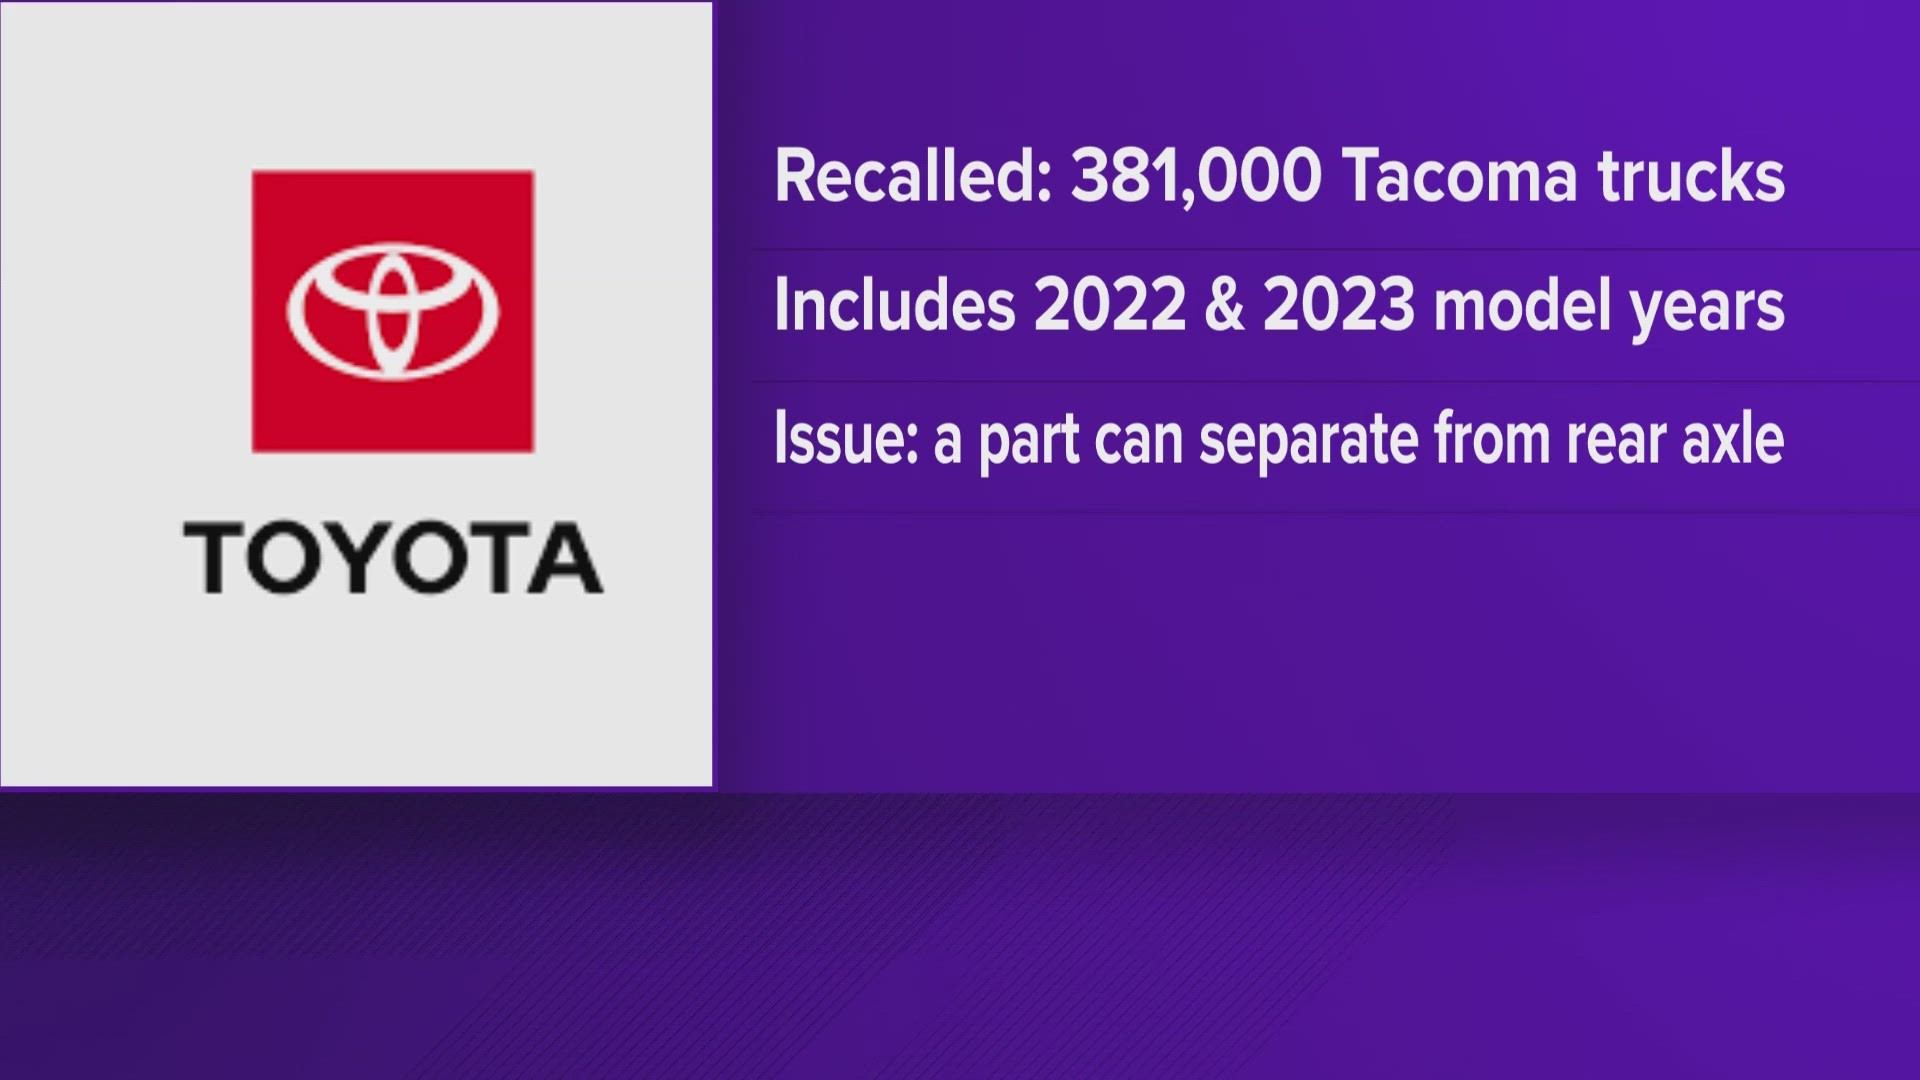 Toyota is recalling hundreds of thousands of Tacoma trucks because a part can separate from the rear axle.